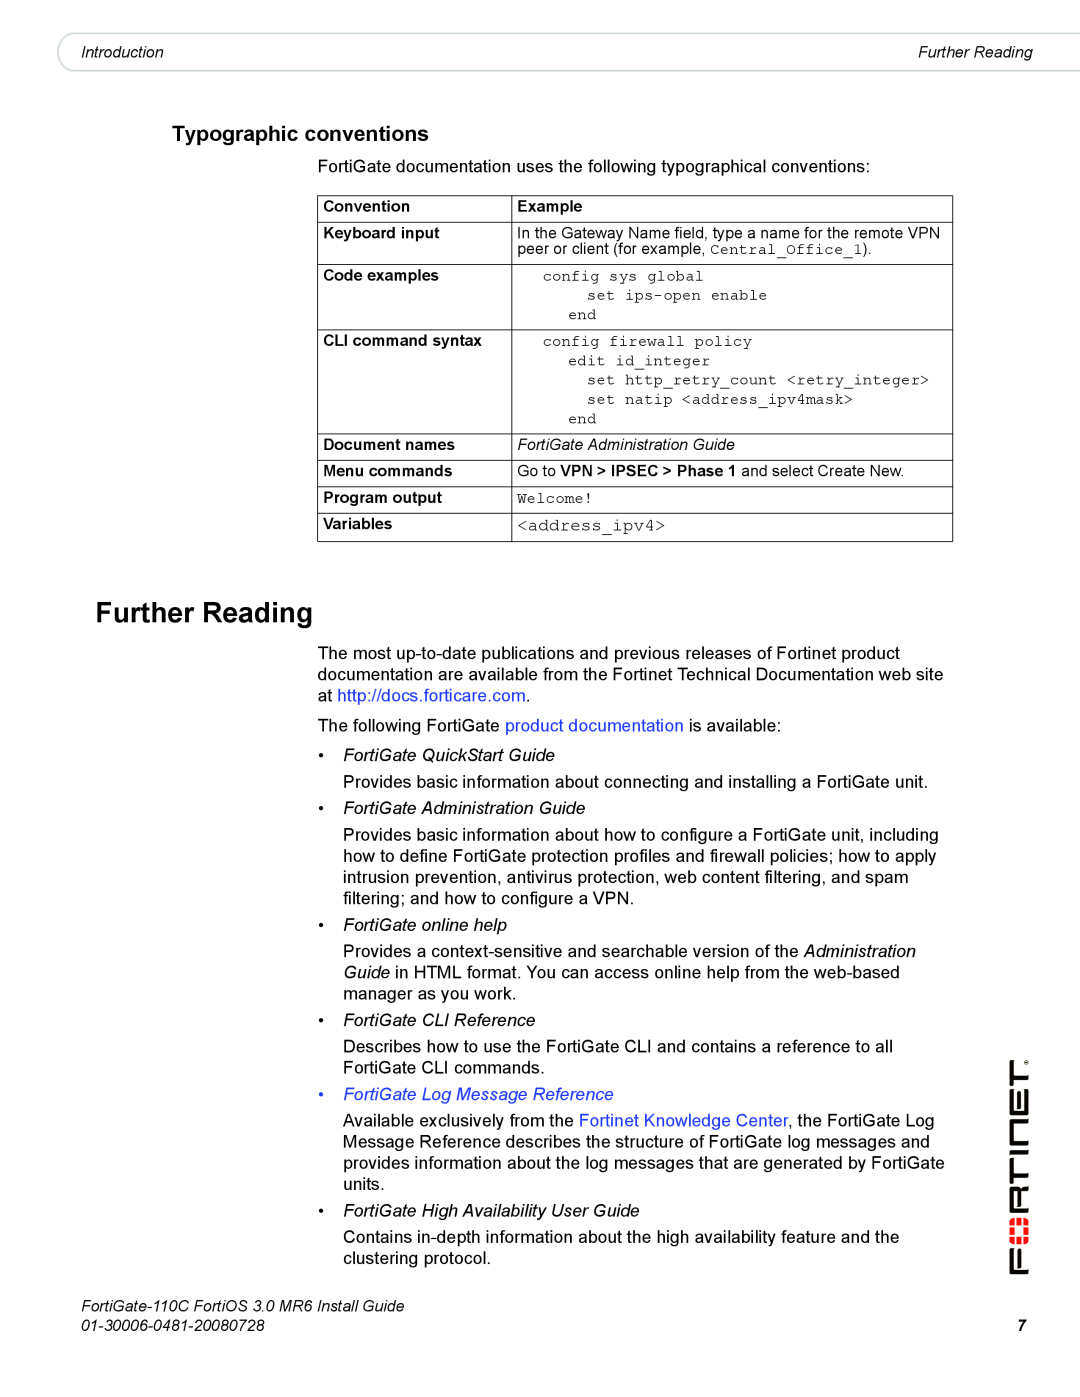 Fortinet 110C manual Further Reading, Typographic conventions, FortiGate QuickStart Guide, FortiGate Administration Guide 